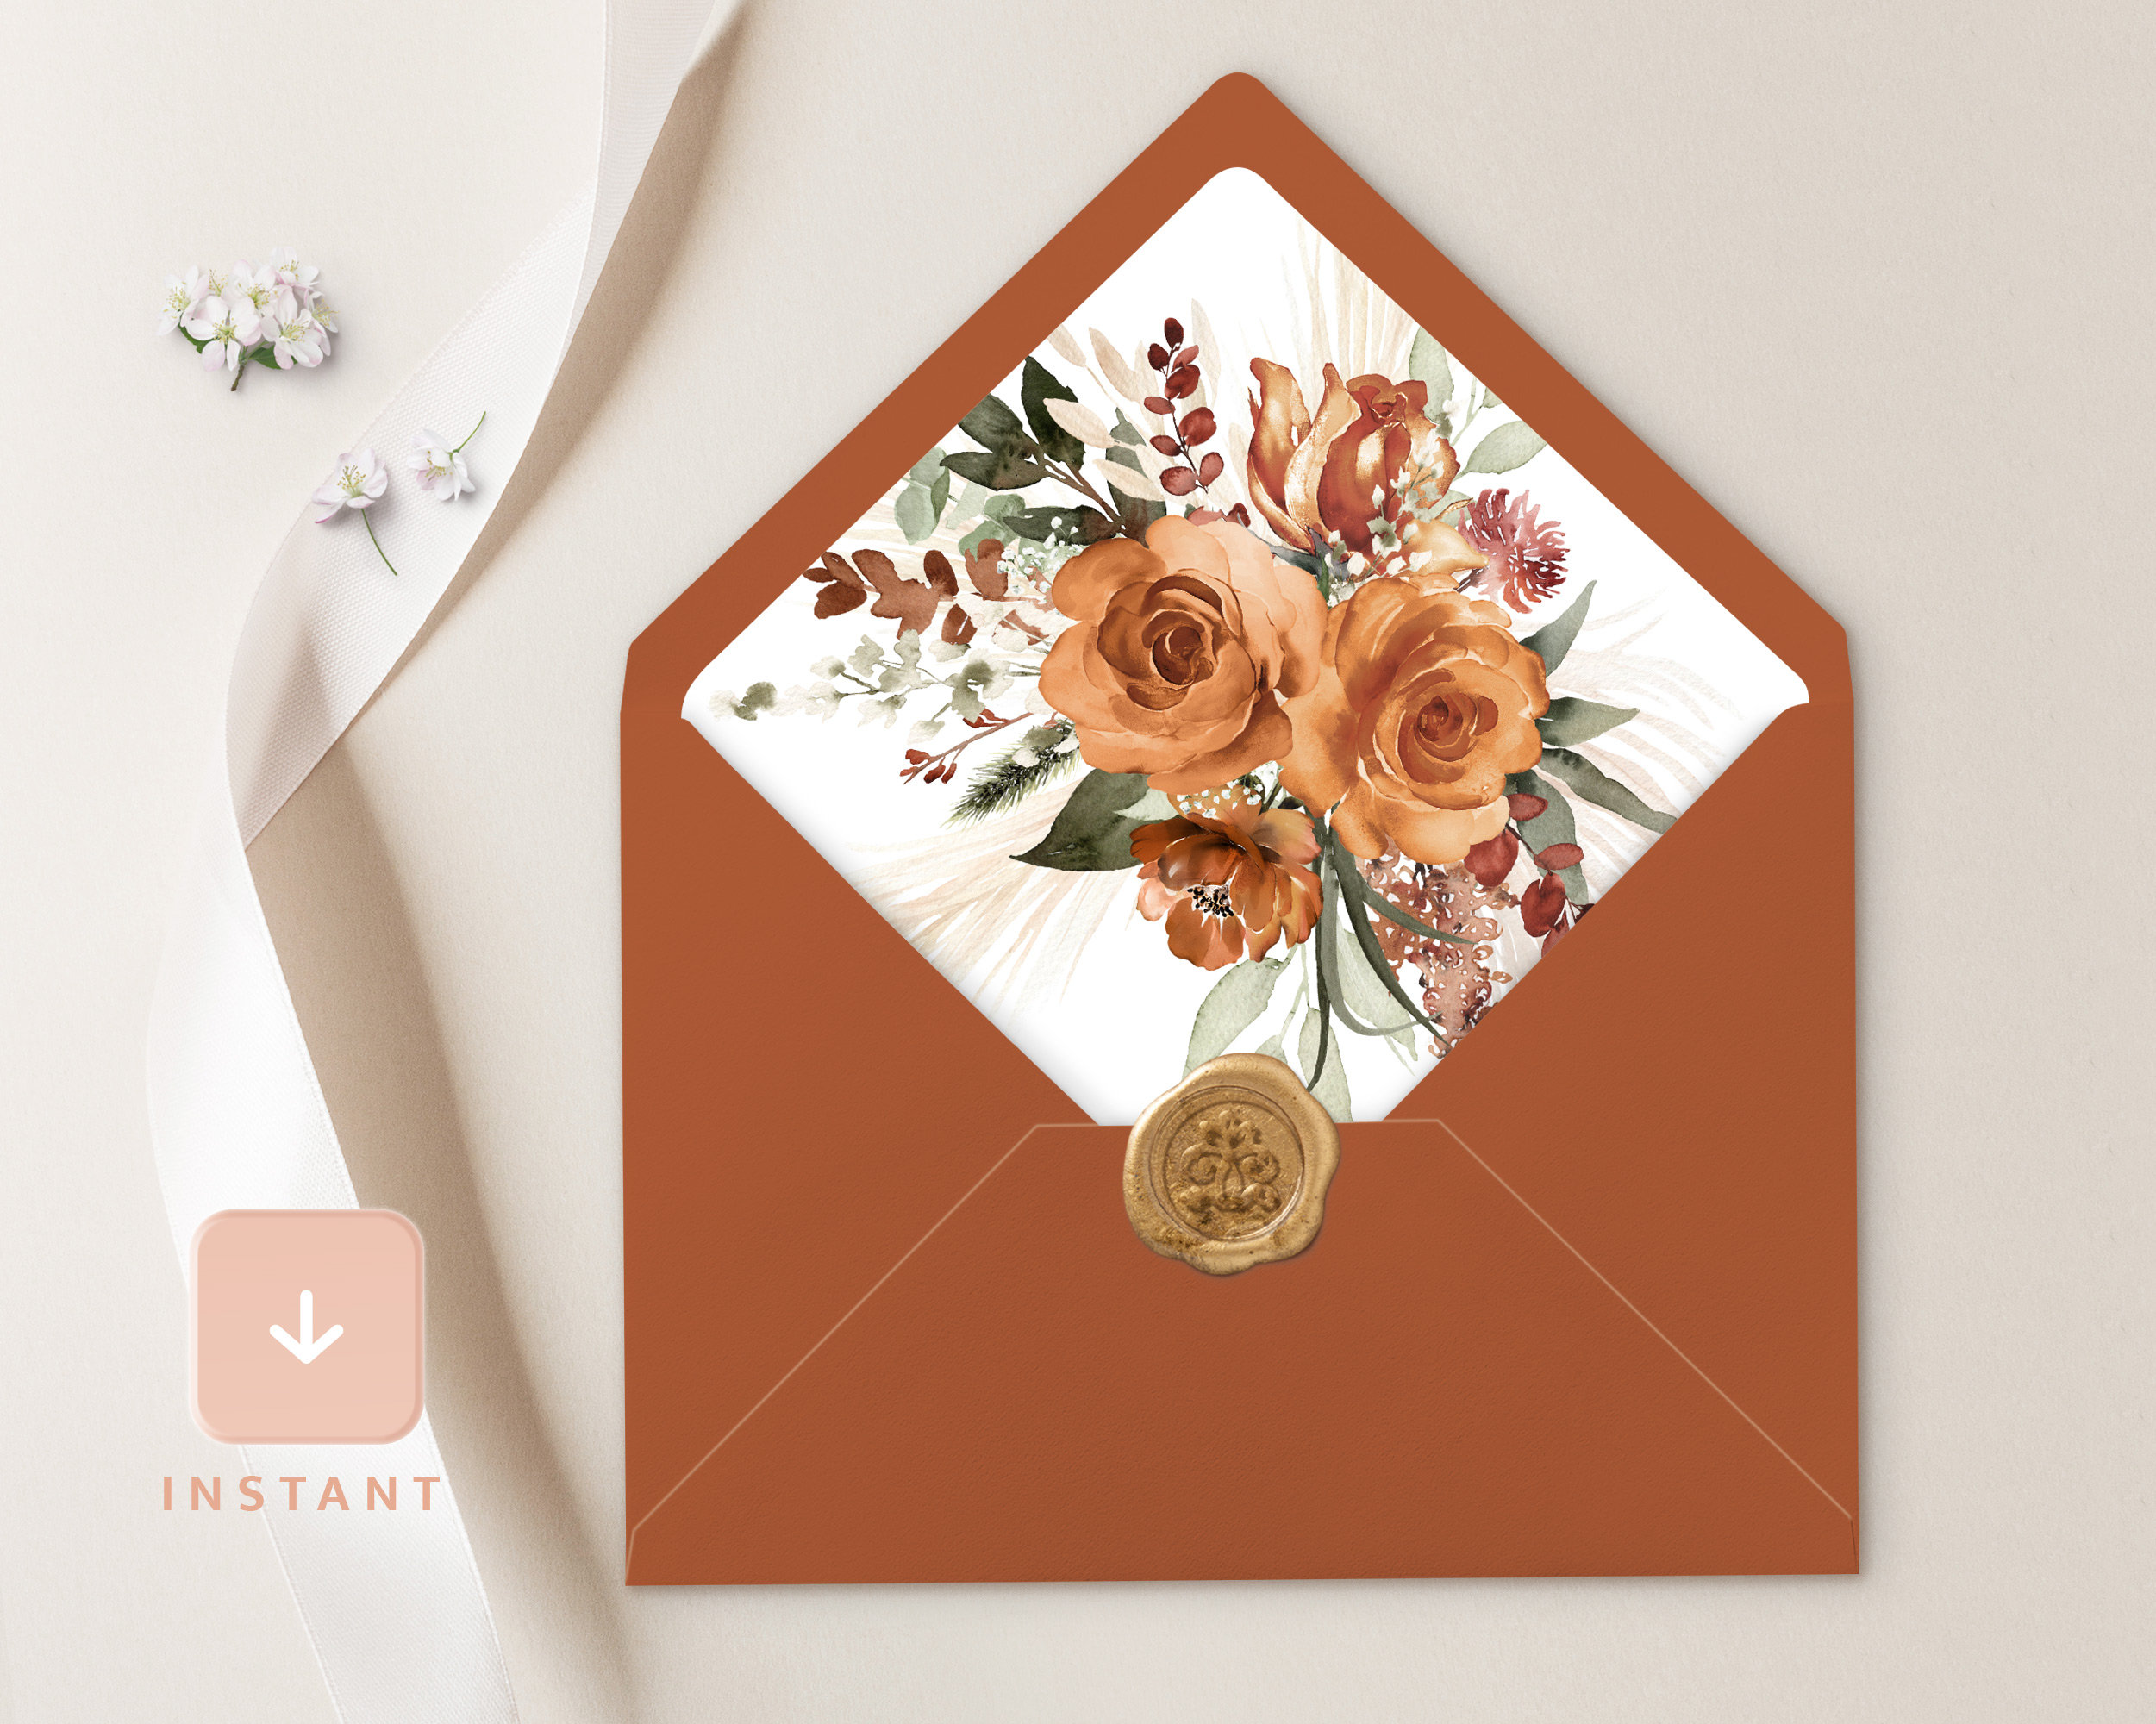 20 Pretty Envelope Liners That Dressed Up Wedding Invitation Suites